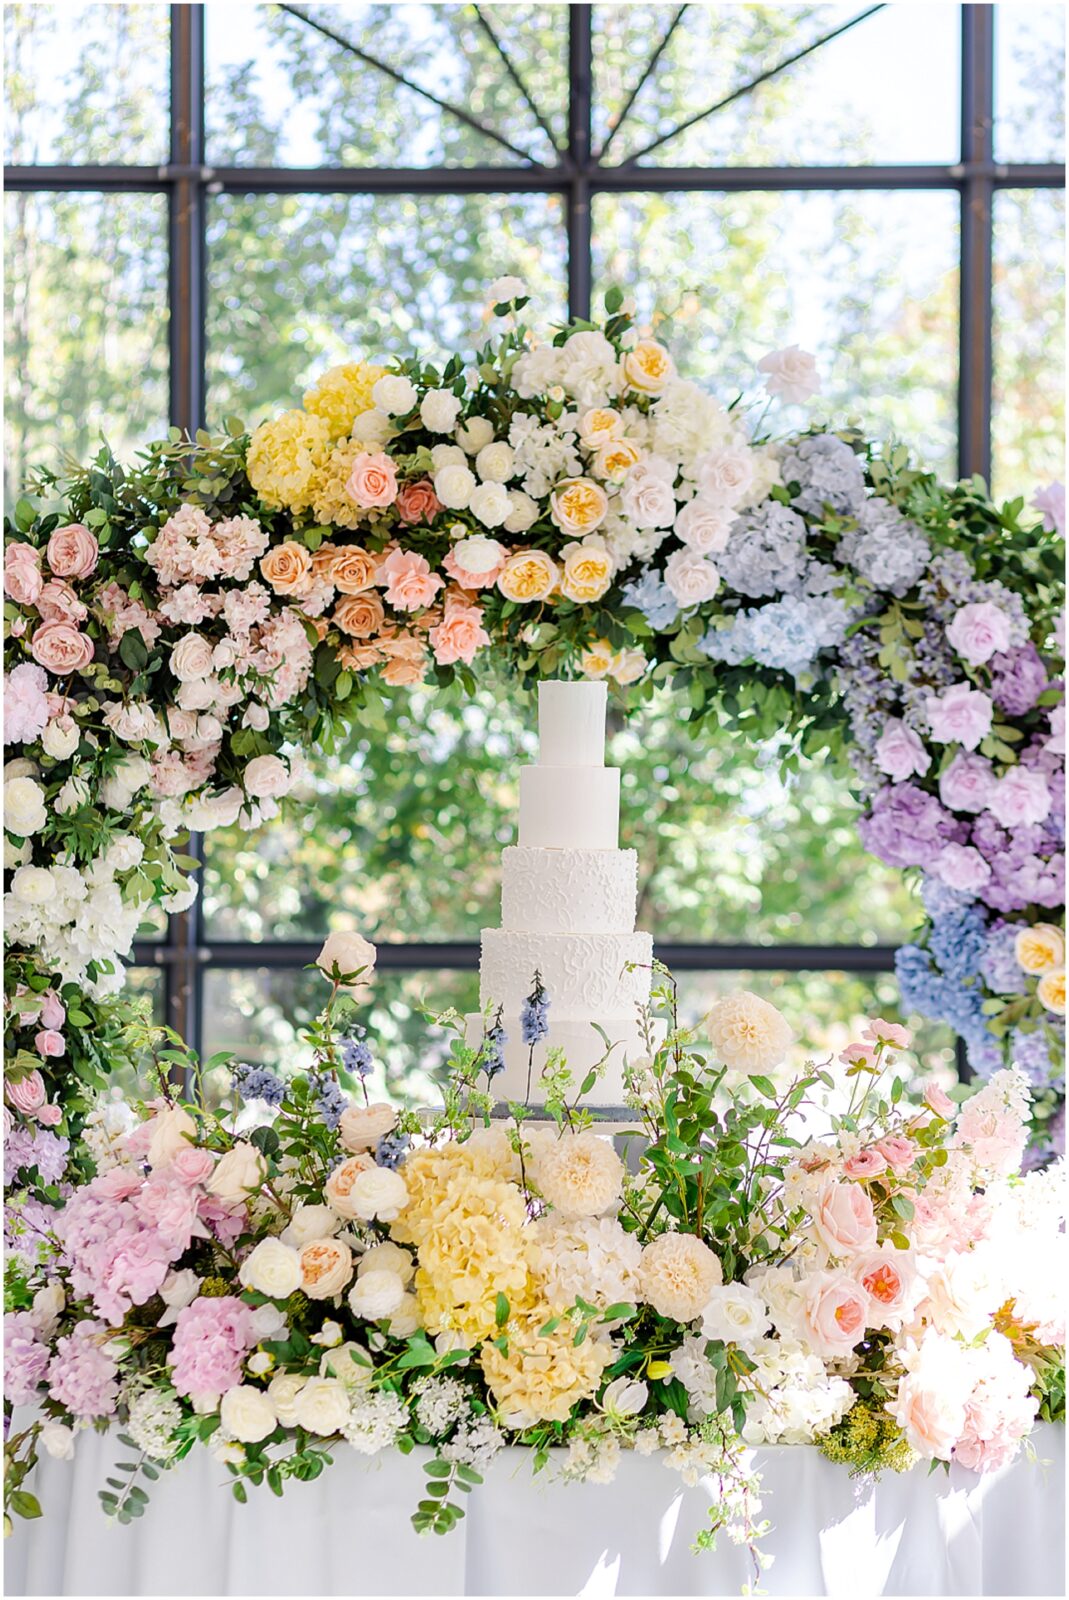 gorgeous class white wedding cake with flowers - Wedding centerpieces ideas - wedding flower ideas - colorful wedding photography and floral - tablespace - wedding decor - Italian Styled Garden Wedding by Kansas City STL Florida 30A Wedding Photography Mariam Saifan Photography